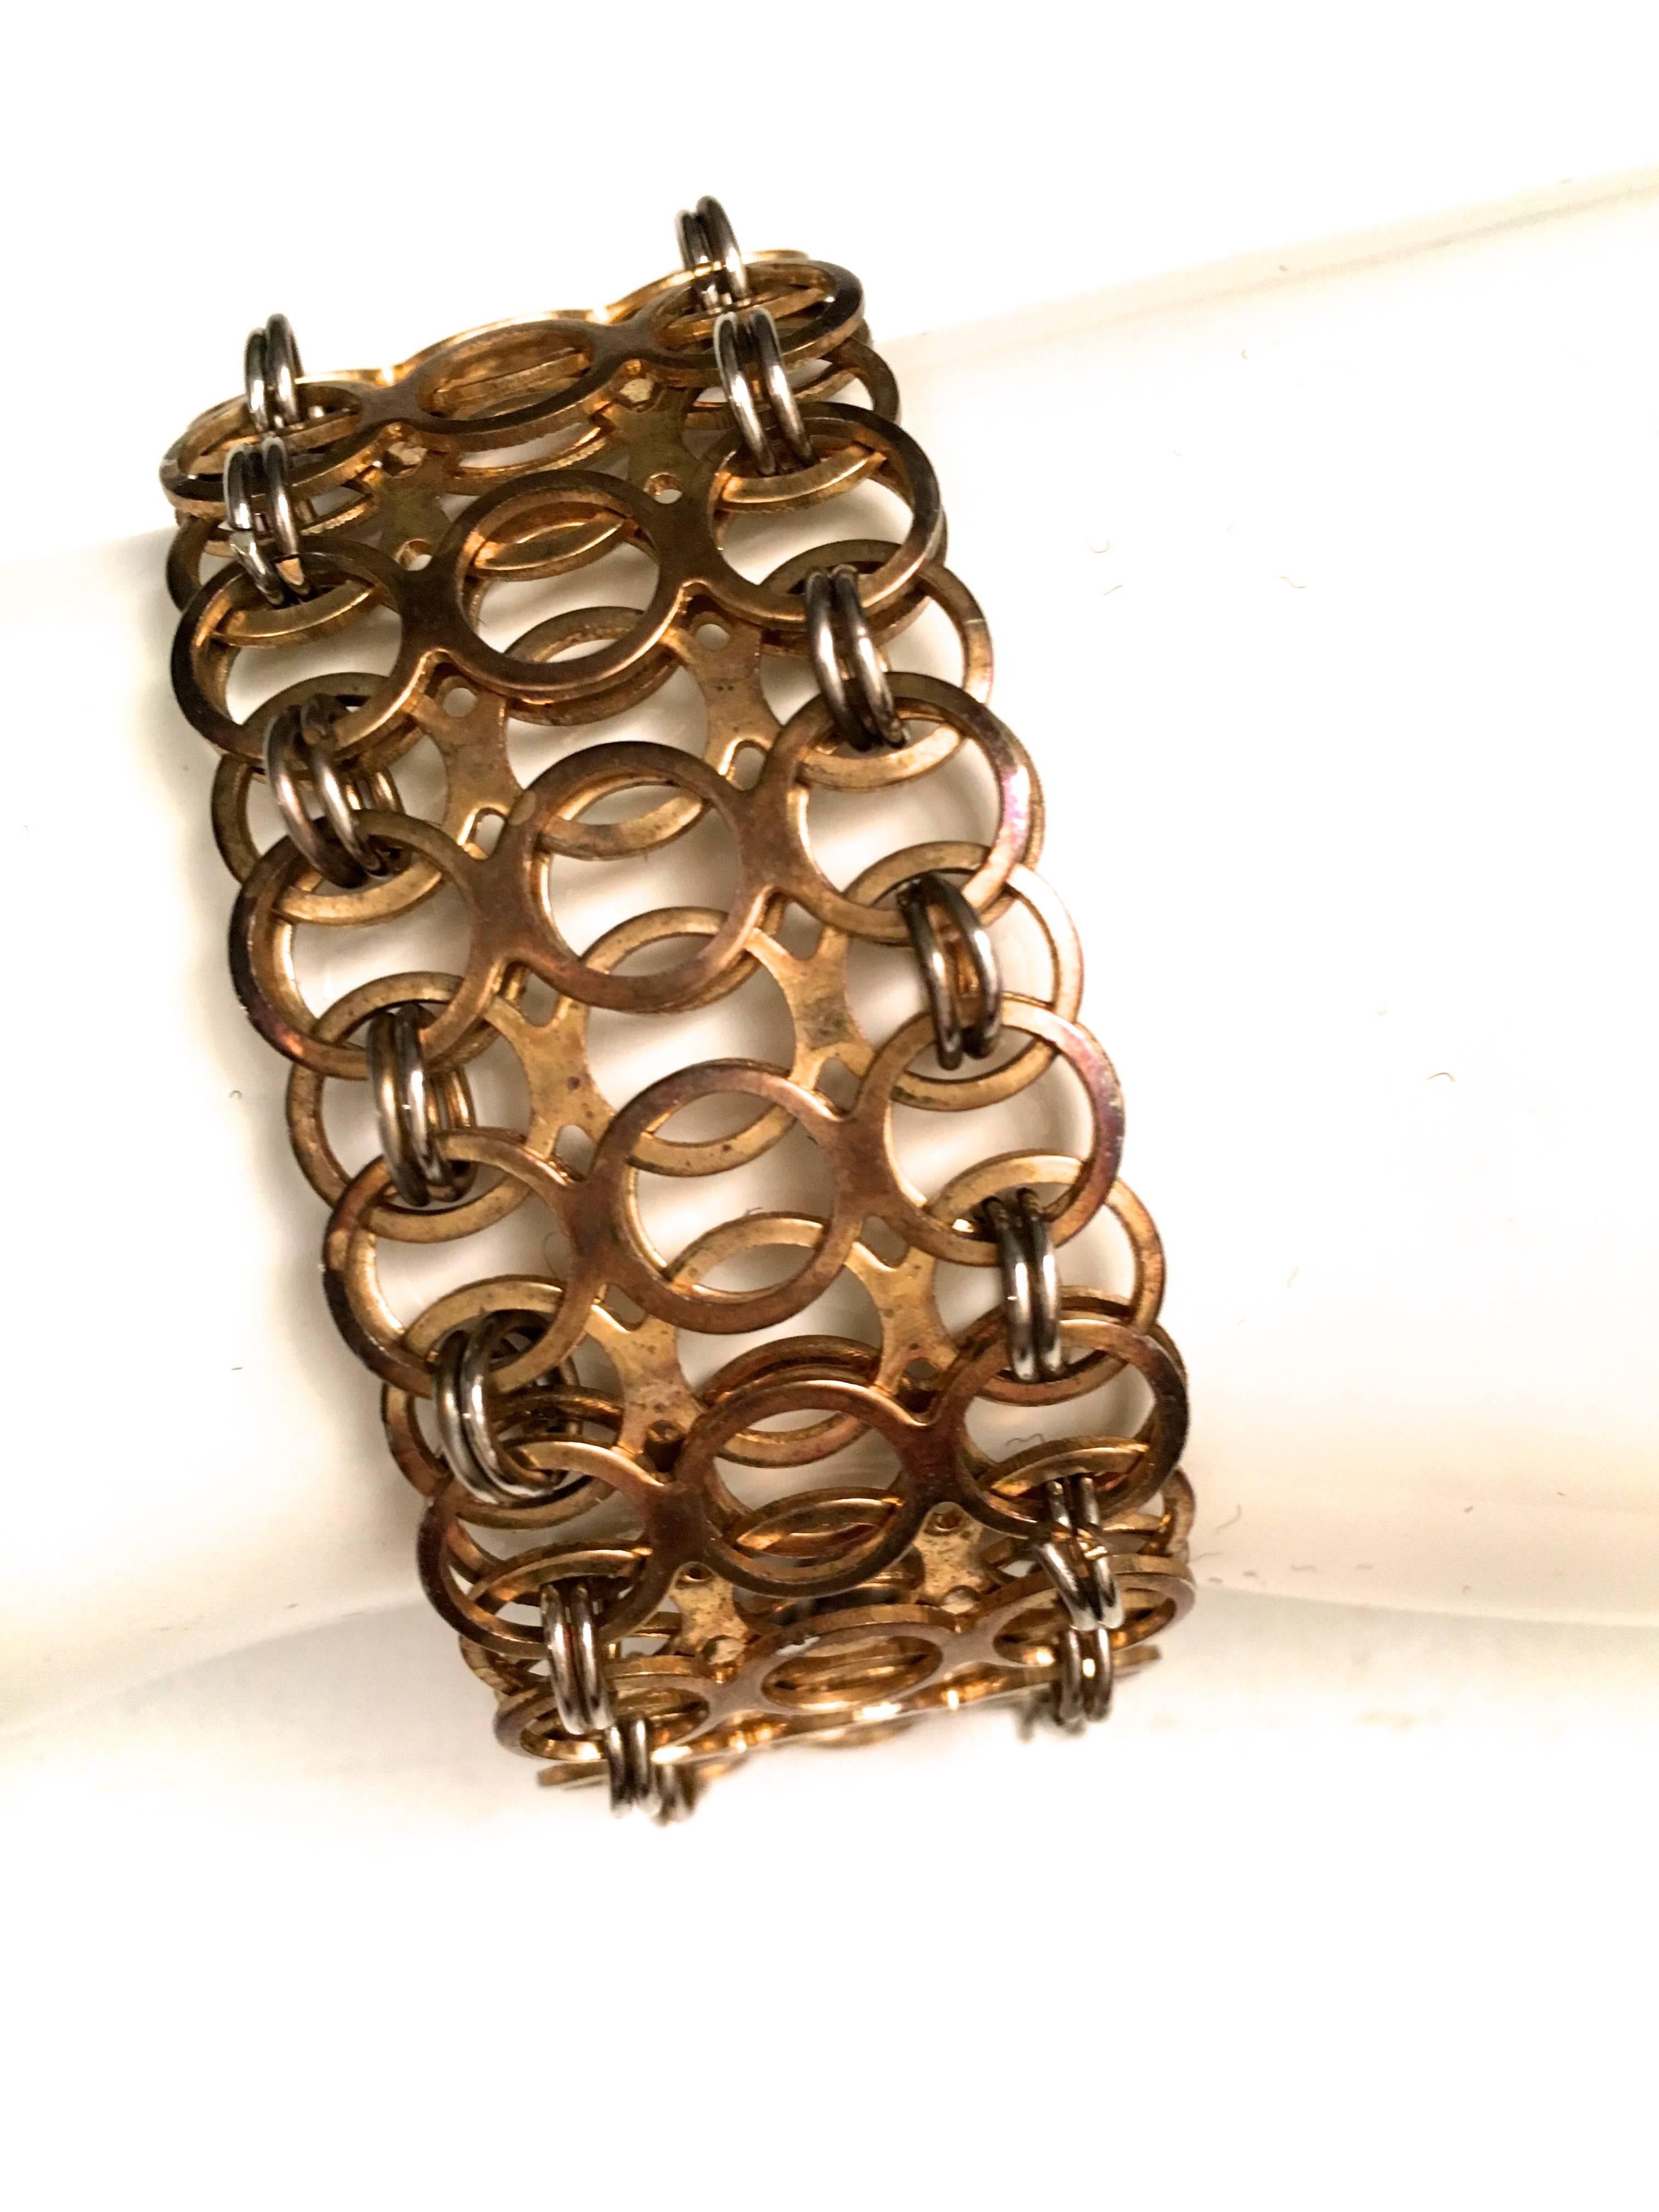 Presented here is a gorgeous vintage bracelet from Paco Rabanne. The bracelet is from the late 1960's early 1970's. The bracelet is made from connected links and rings with extreme attention to detail and design. The bracelet is crafted and designed